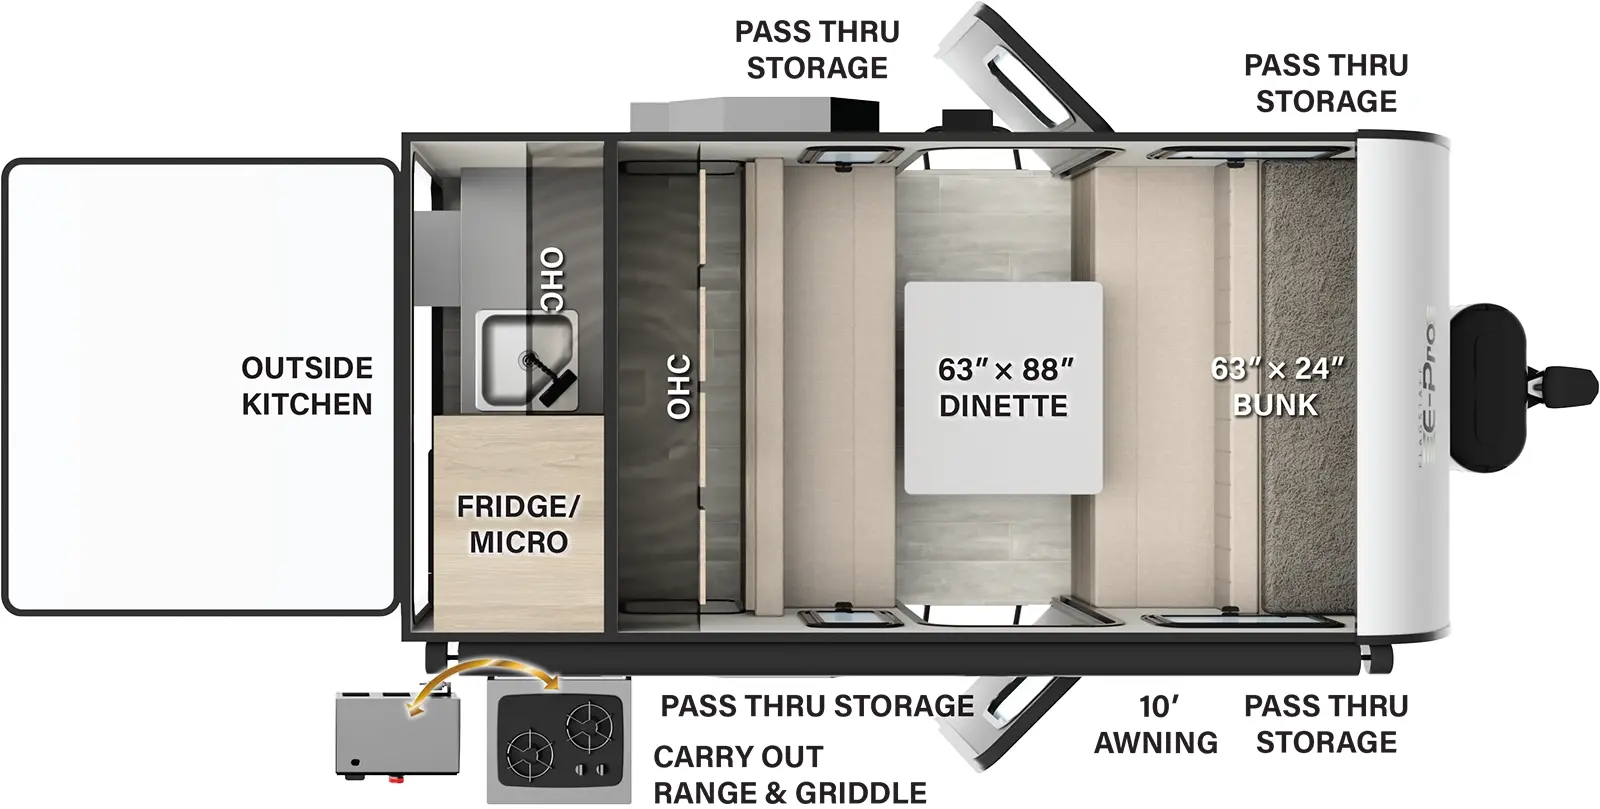 The E14D has zero slideouts and entry doors on each side. Exterior features front passthrough storage, mid passthrough storage, 10 foot awning, carryout range and griddle, and rear outside kitchen with refrigerator, microwave, sink and overhead cabinet. Interior layout front to back: front bunk, dinette table, rear overhead cabinet.